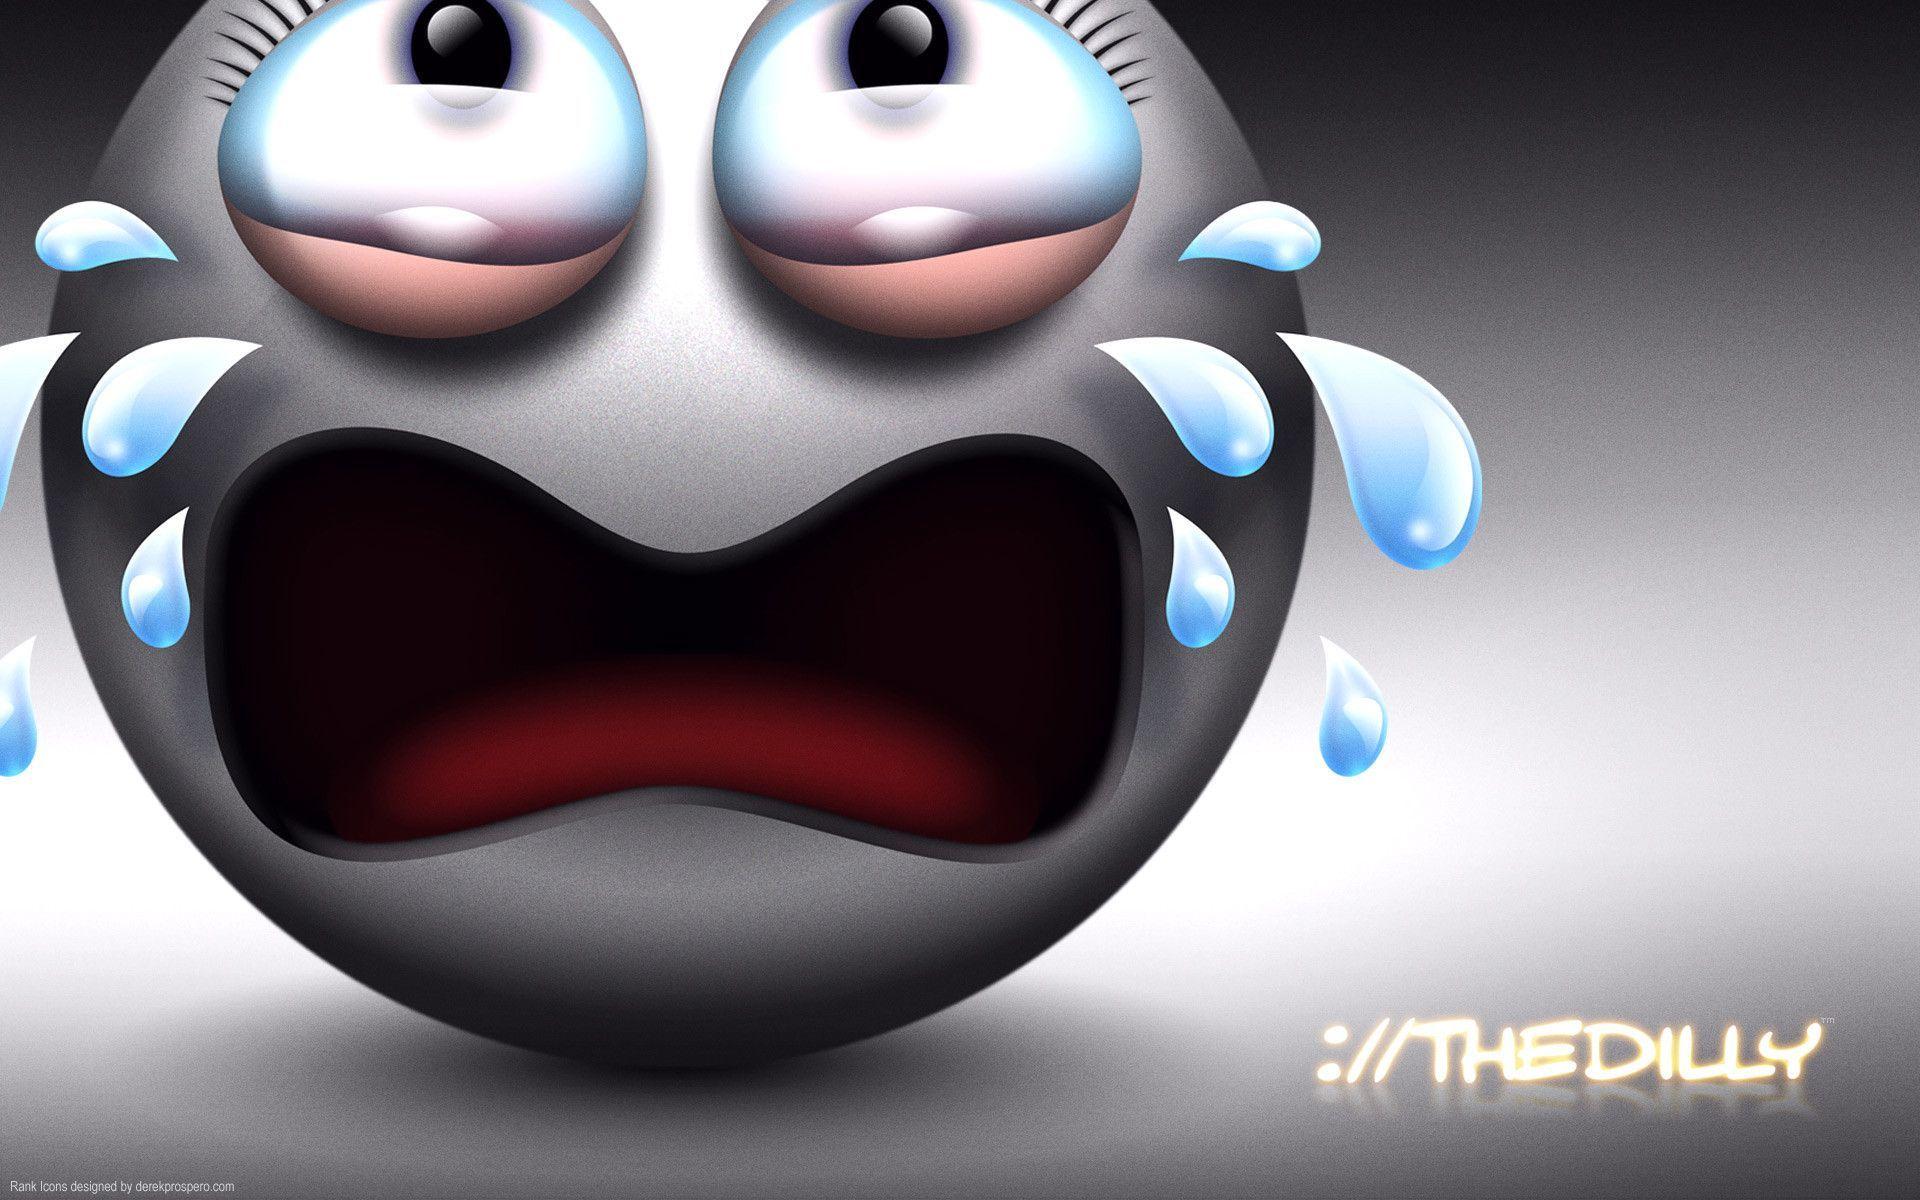 Alayx WAllpaper: The Ugly Crier Face